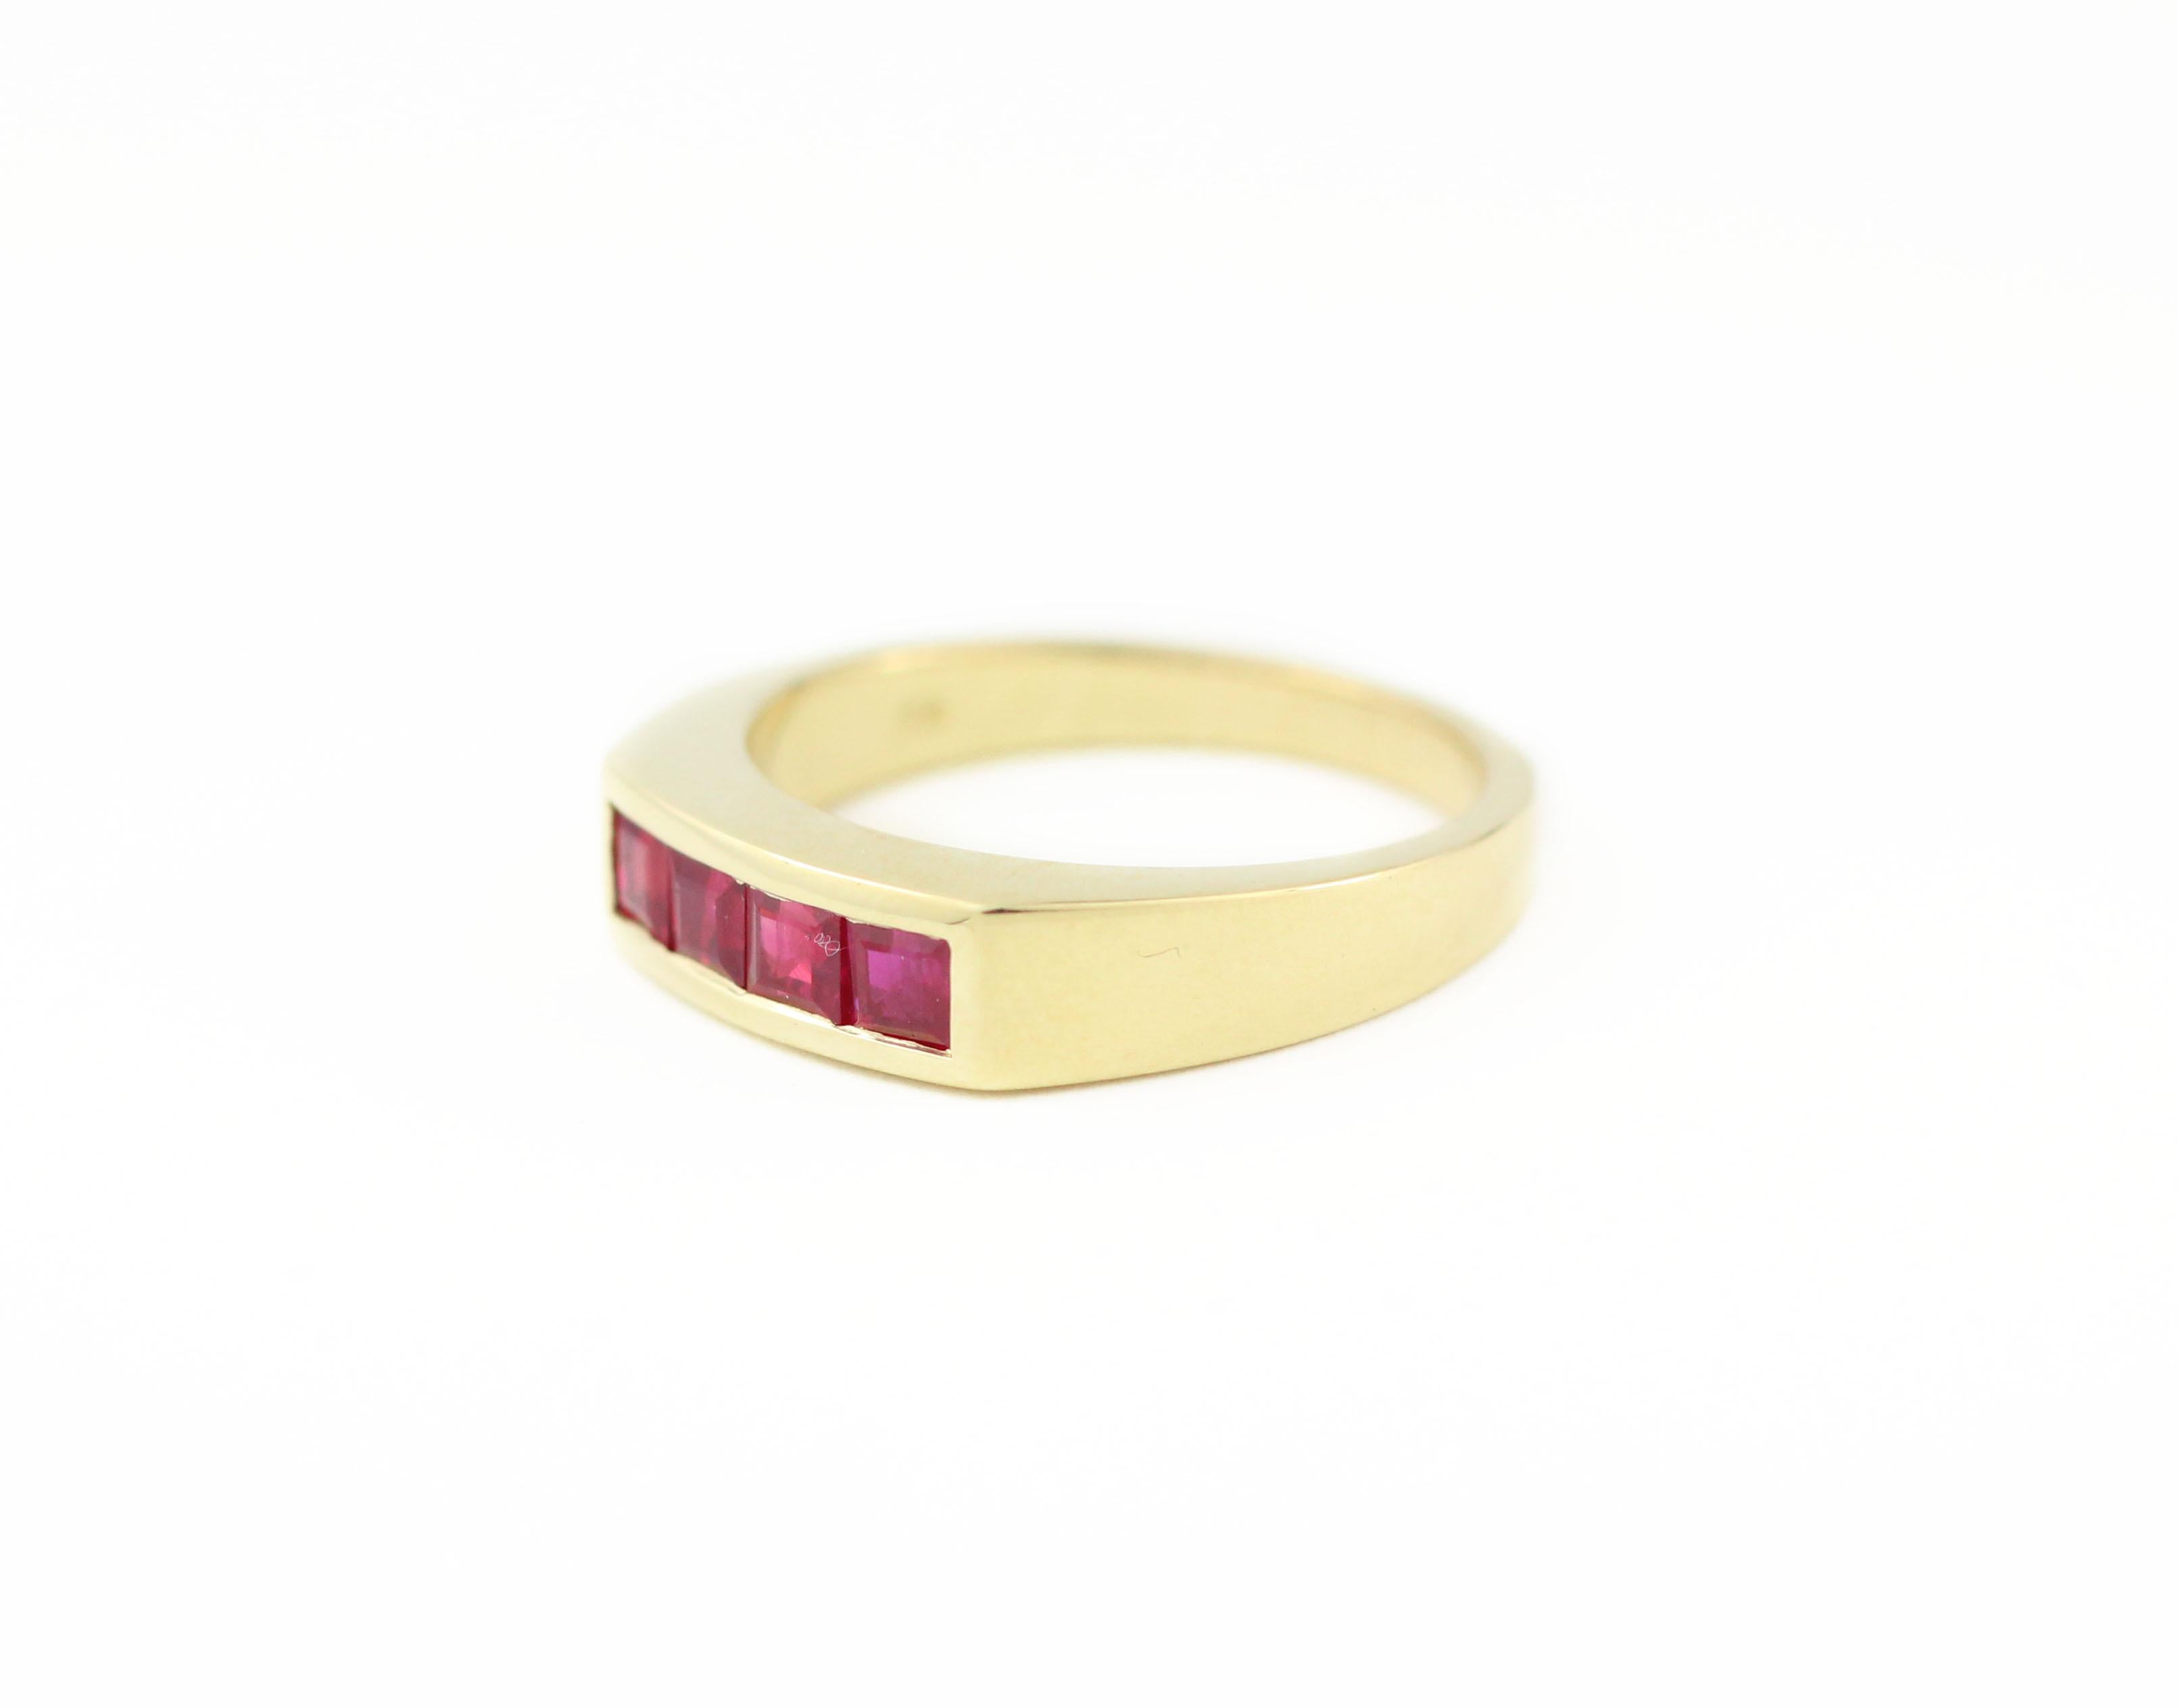 This 18 Kt Gold Ring was made specifically to contain these four fiery, Square Cut Rubies (.97 Cts.).  Perfect for any lover of vibrant rubies or July birthday gift.

In-stock Size 6 1/2 for immediate delivery.

This ring can be sized to fit. 